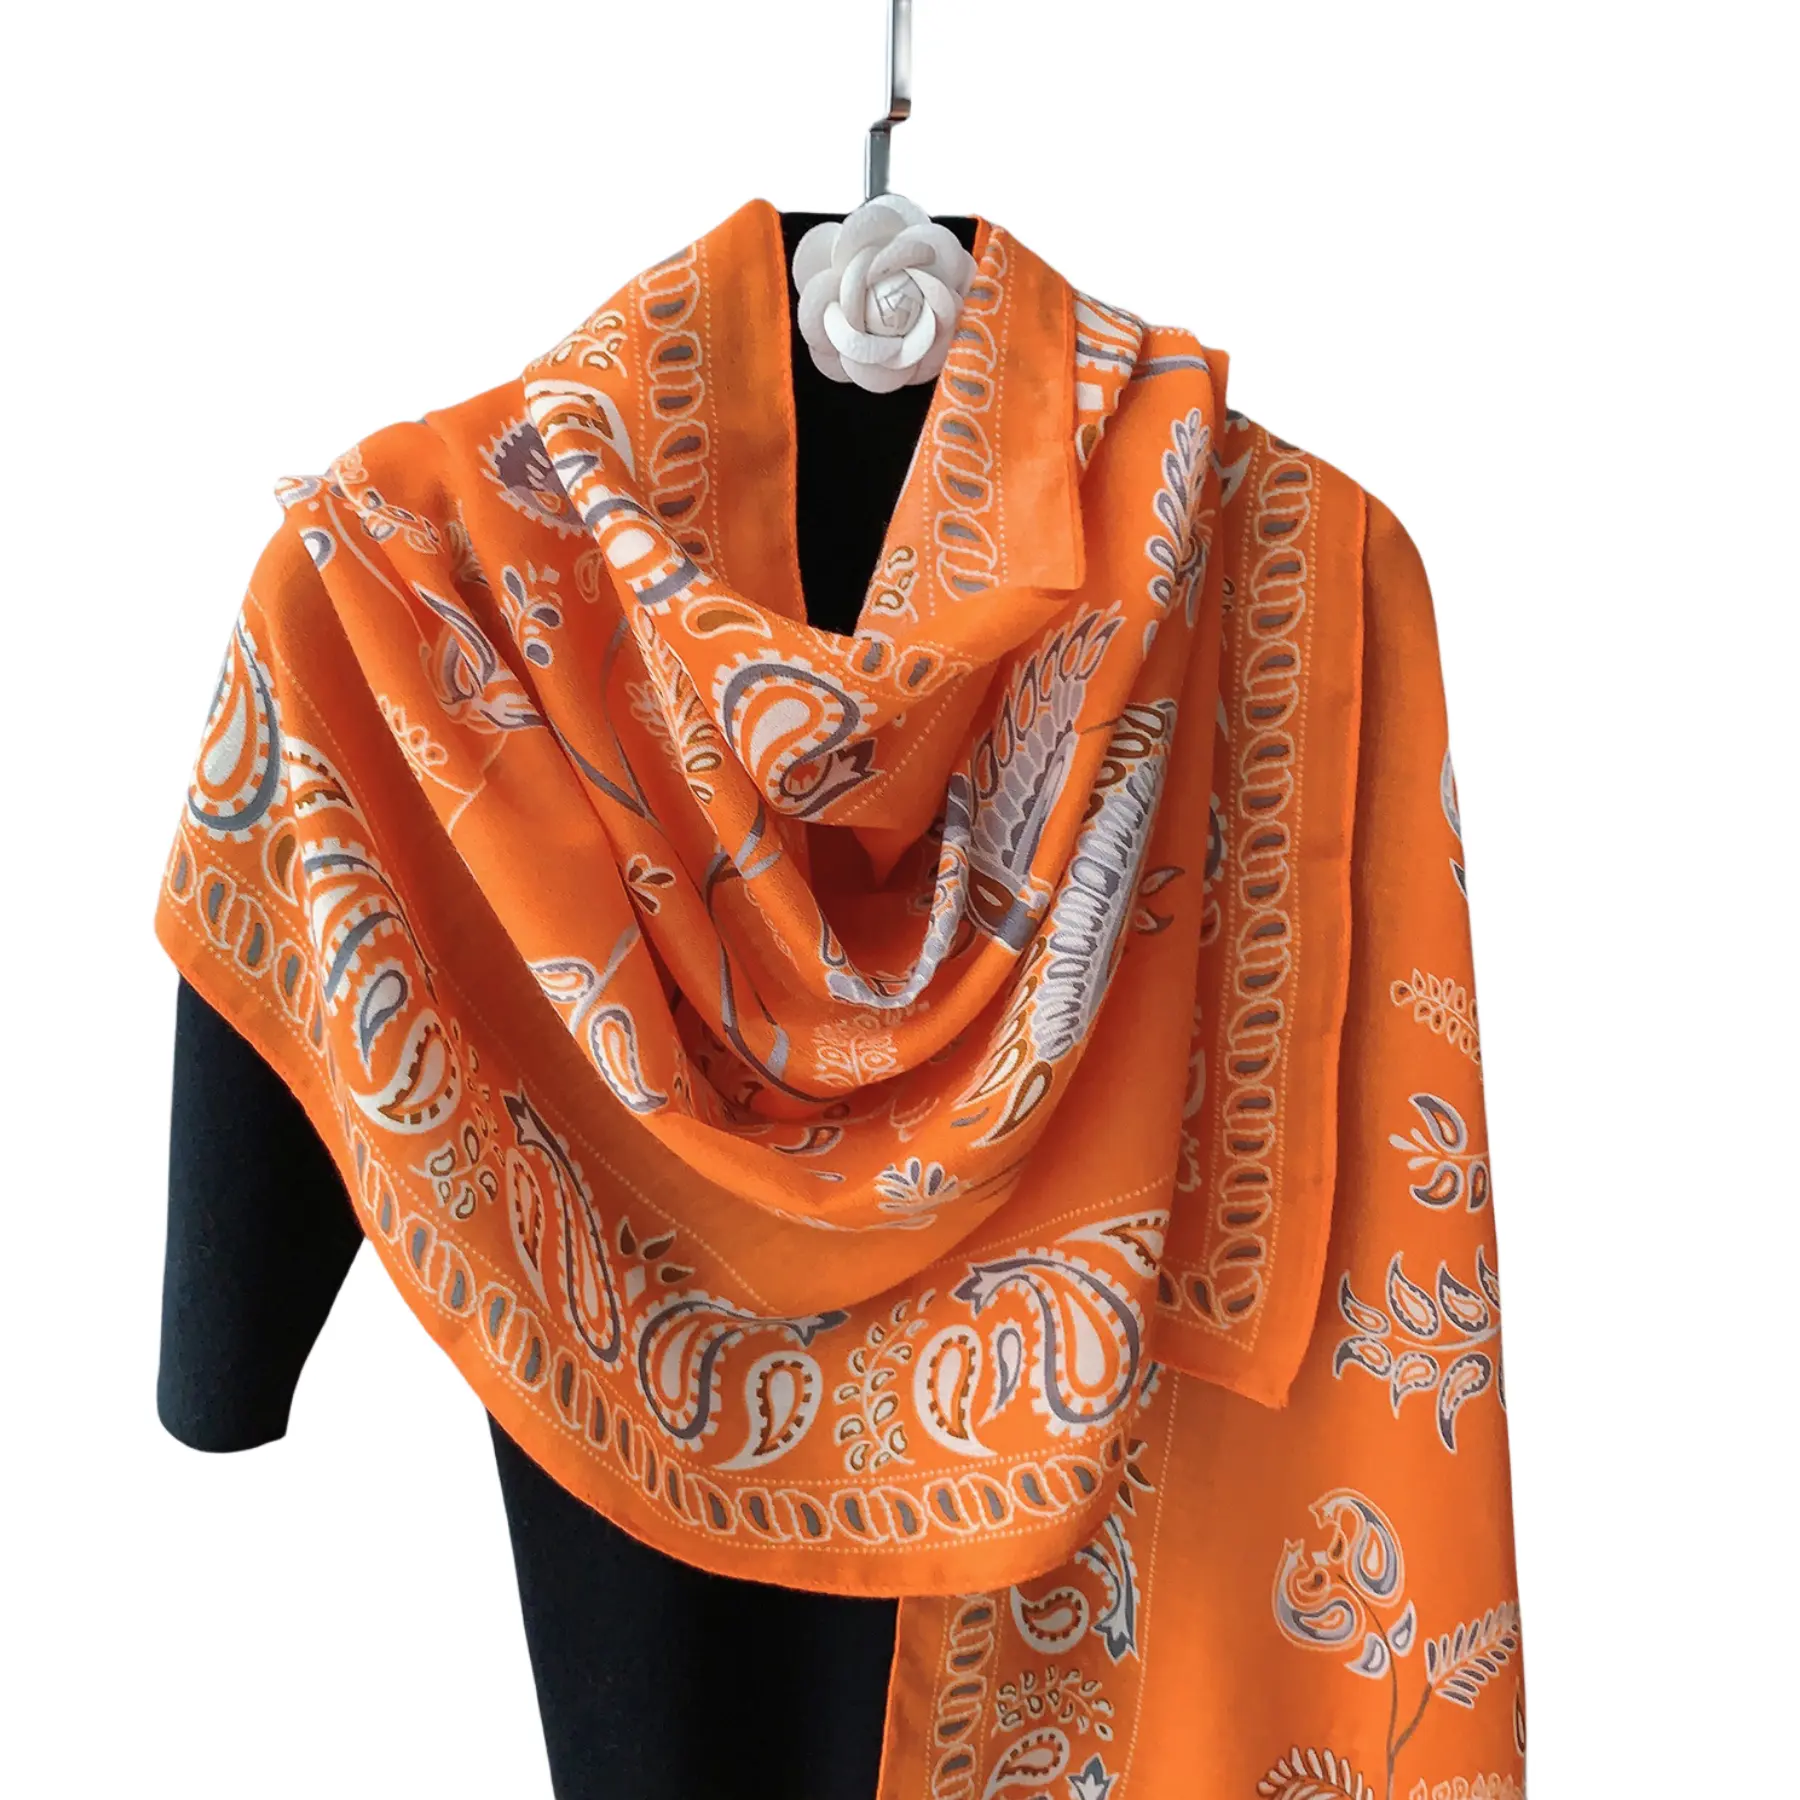 Customized Branded Large Women's Printed Satin Pure Silk Scarf Shawl Scarf Gift